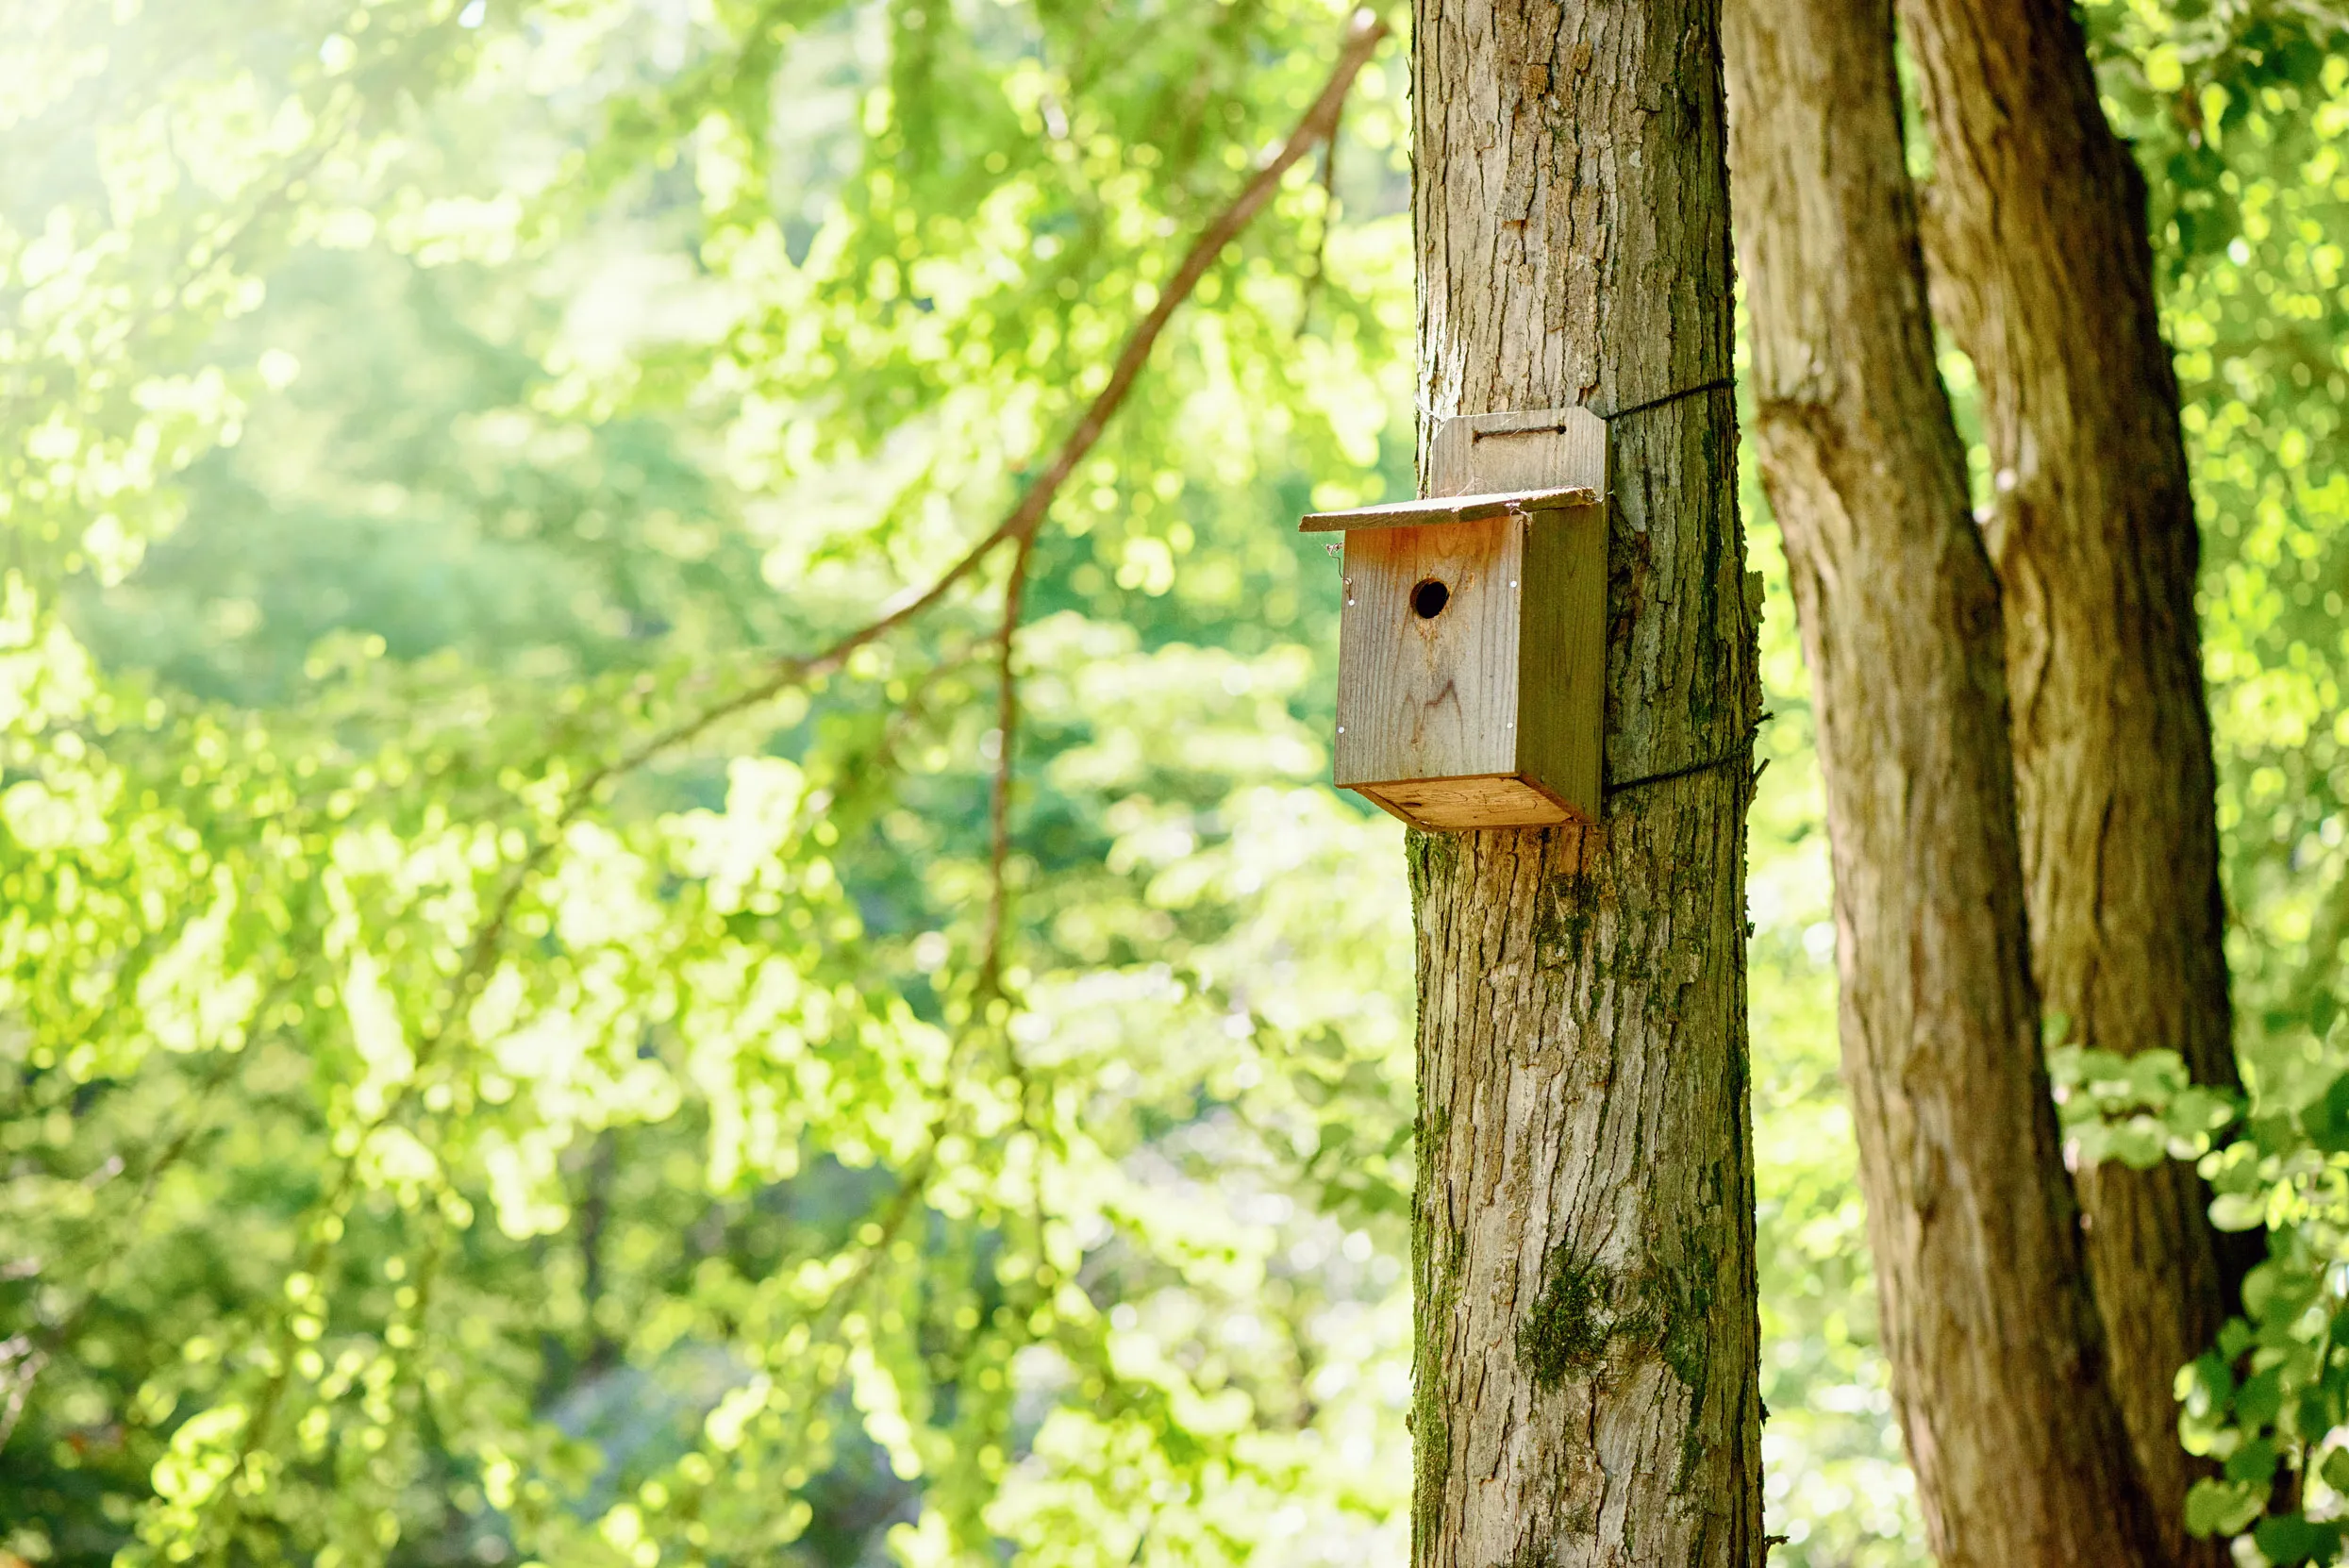 A tall tree trunk, with an unpainted wooden birdbox mounded high up the tree, using brown cord.